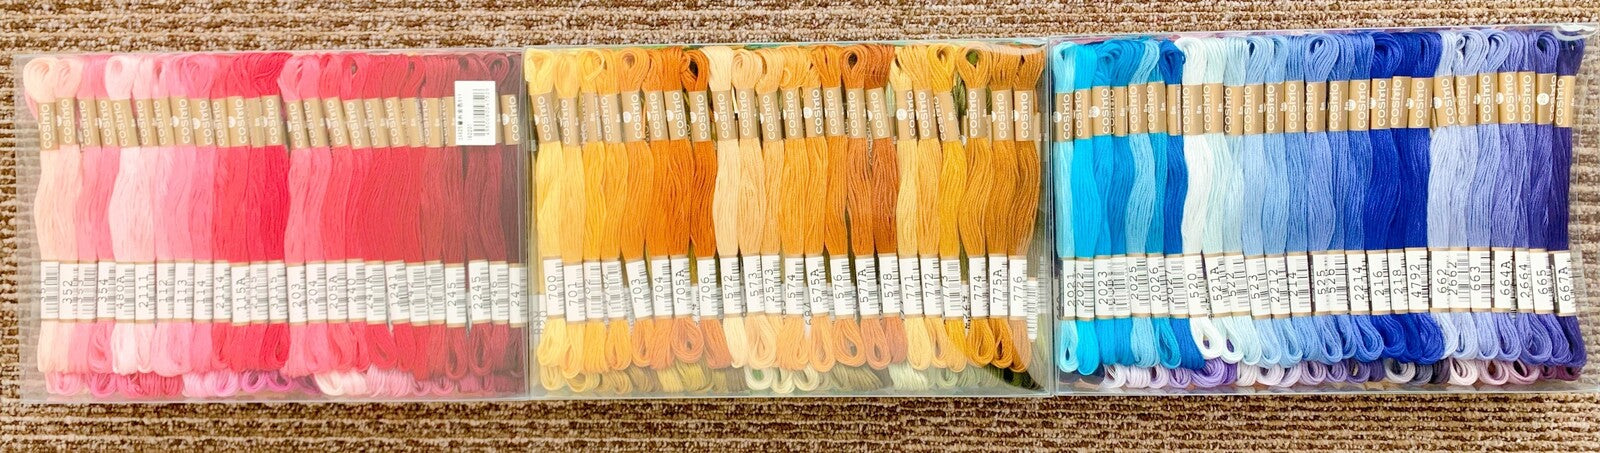 Full Set - Cosmo Embroidery Floss Collection - 501 Skeins | Cosmo Lecein *CUSTOM ORDER - SHIPS IN ~4 WEEKS*